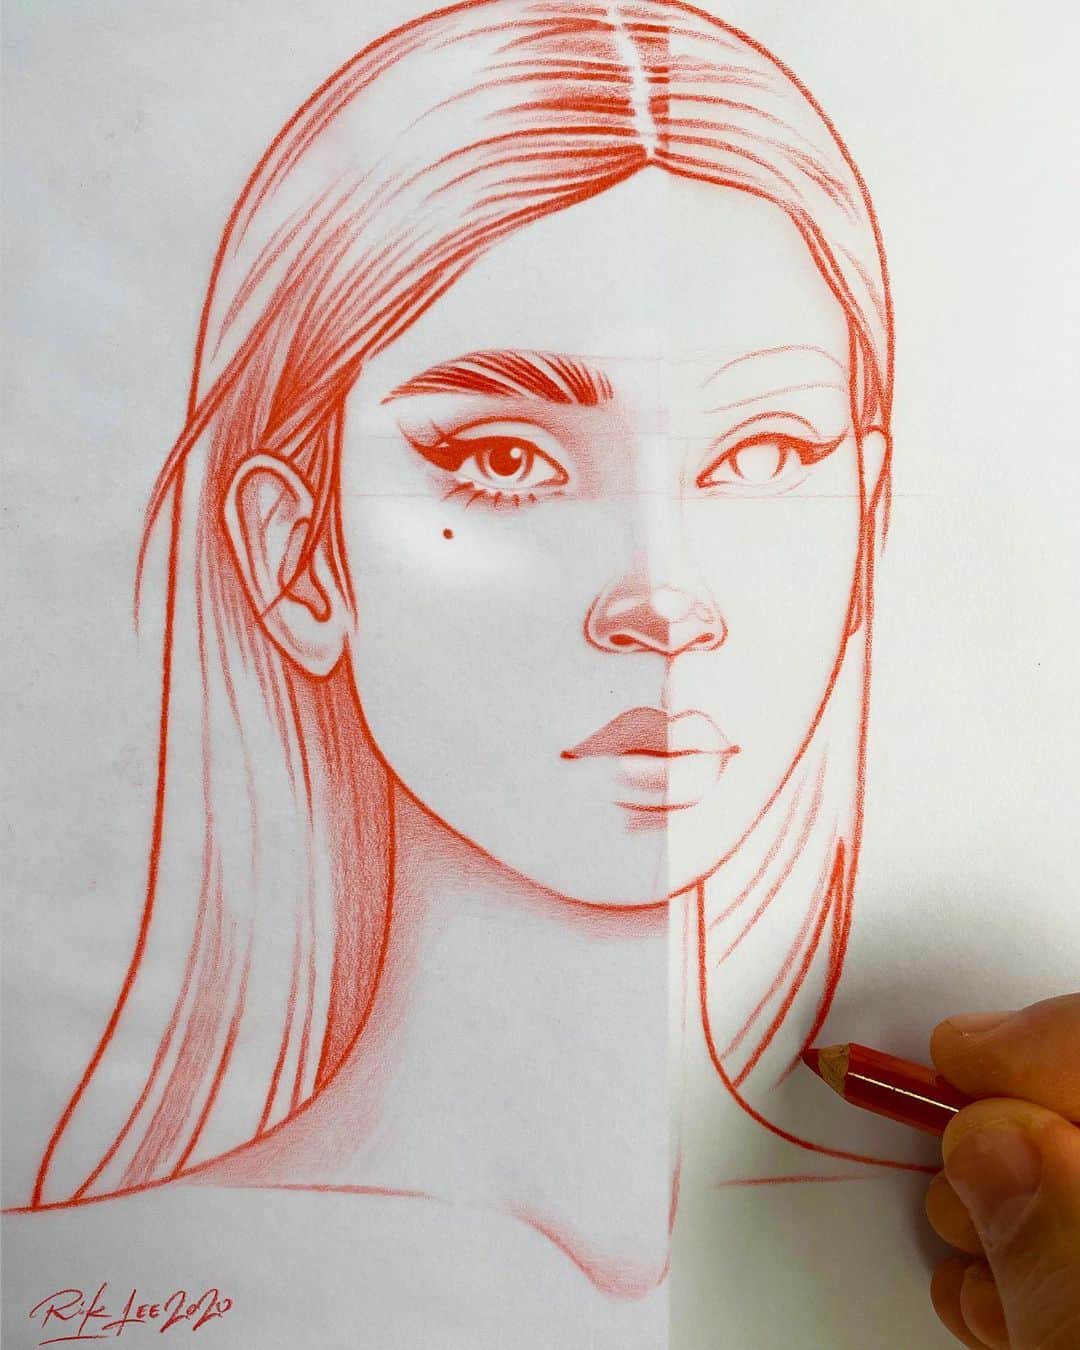 Rik Leeのインスタグラム：「I thought this was kind of interesting. I’ve crudely pasted a couple of photos together that show a sketch in progress and the finished piece. It gives a glimpse into my process and how I slowly build up the line weight while I draw. Sketches like this generally take me about 4-5 hours to finish. . #riklee #illustration #sketch #art #drawing #tattoo #babe #beauty #portrait #pencildrawing」